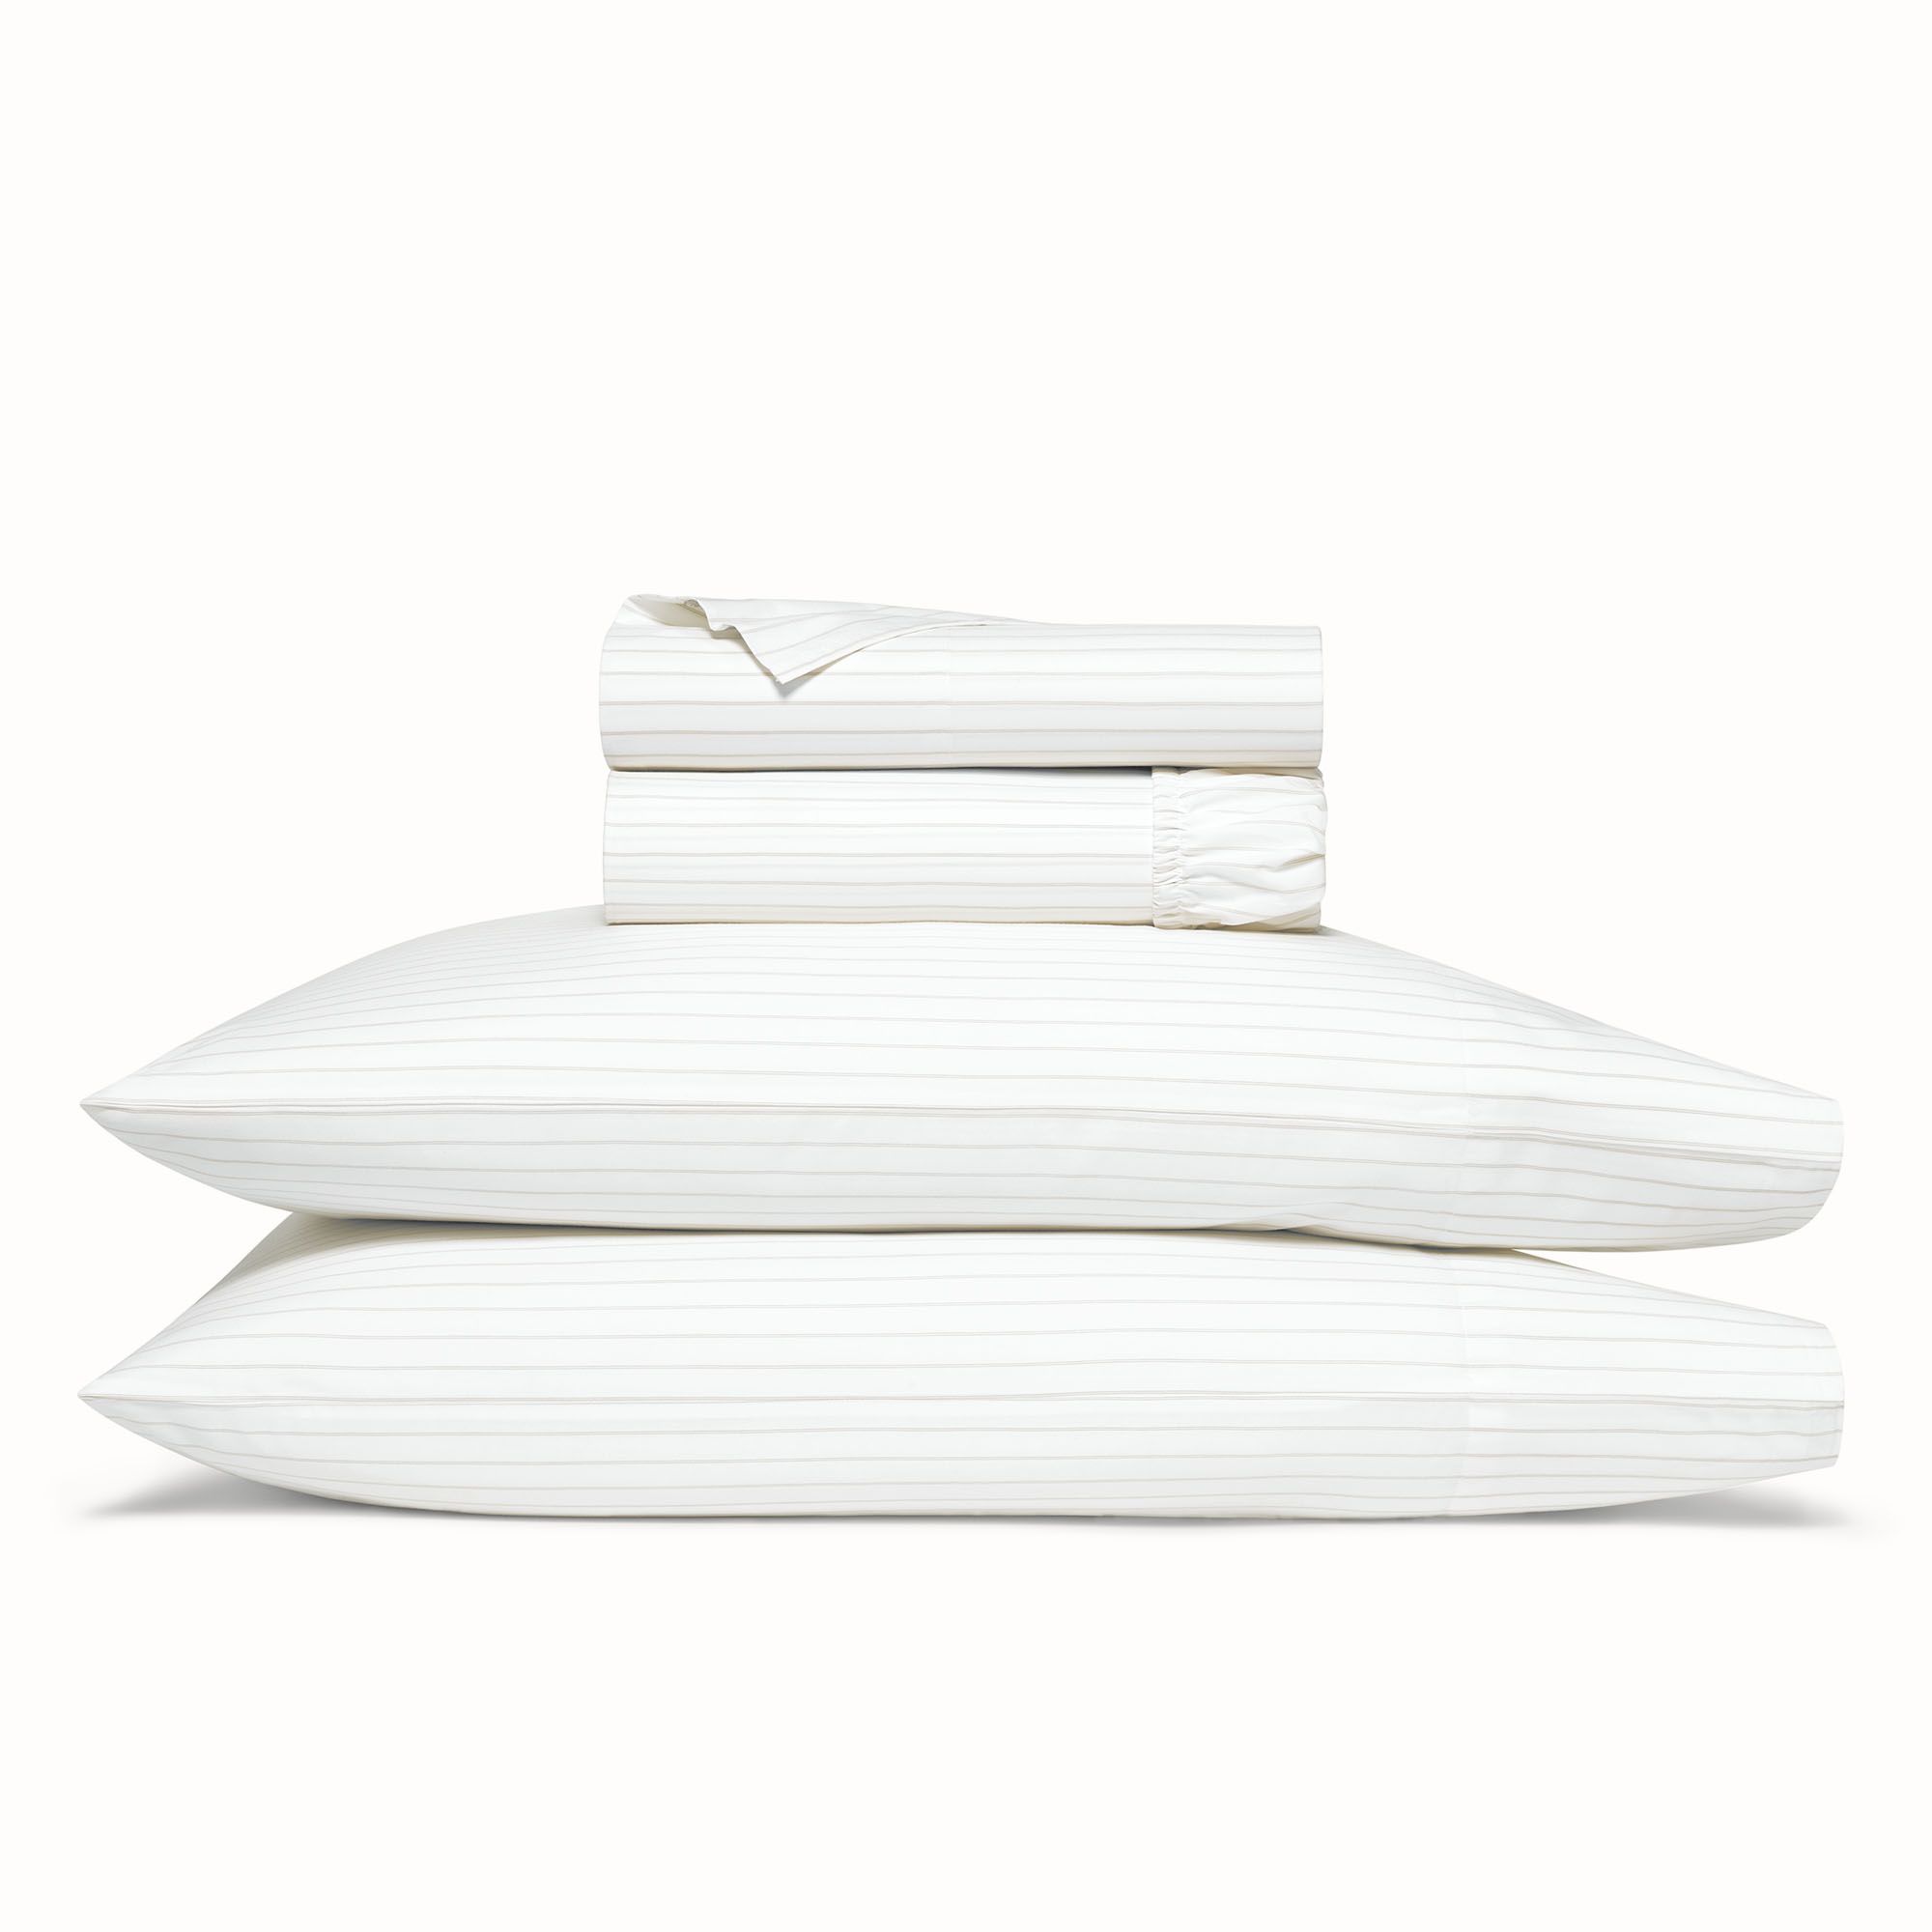 Dune Cotton Percale Sheets -  Classic, Stripe Set | Boll & Branch | Boll & Branch